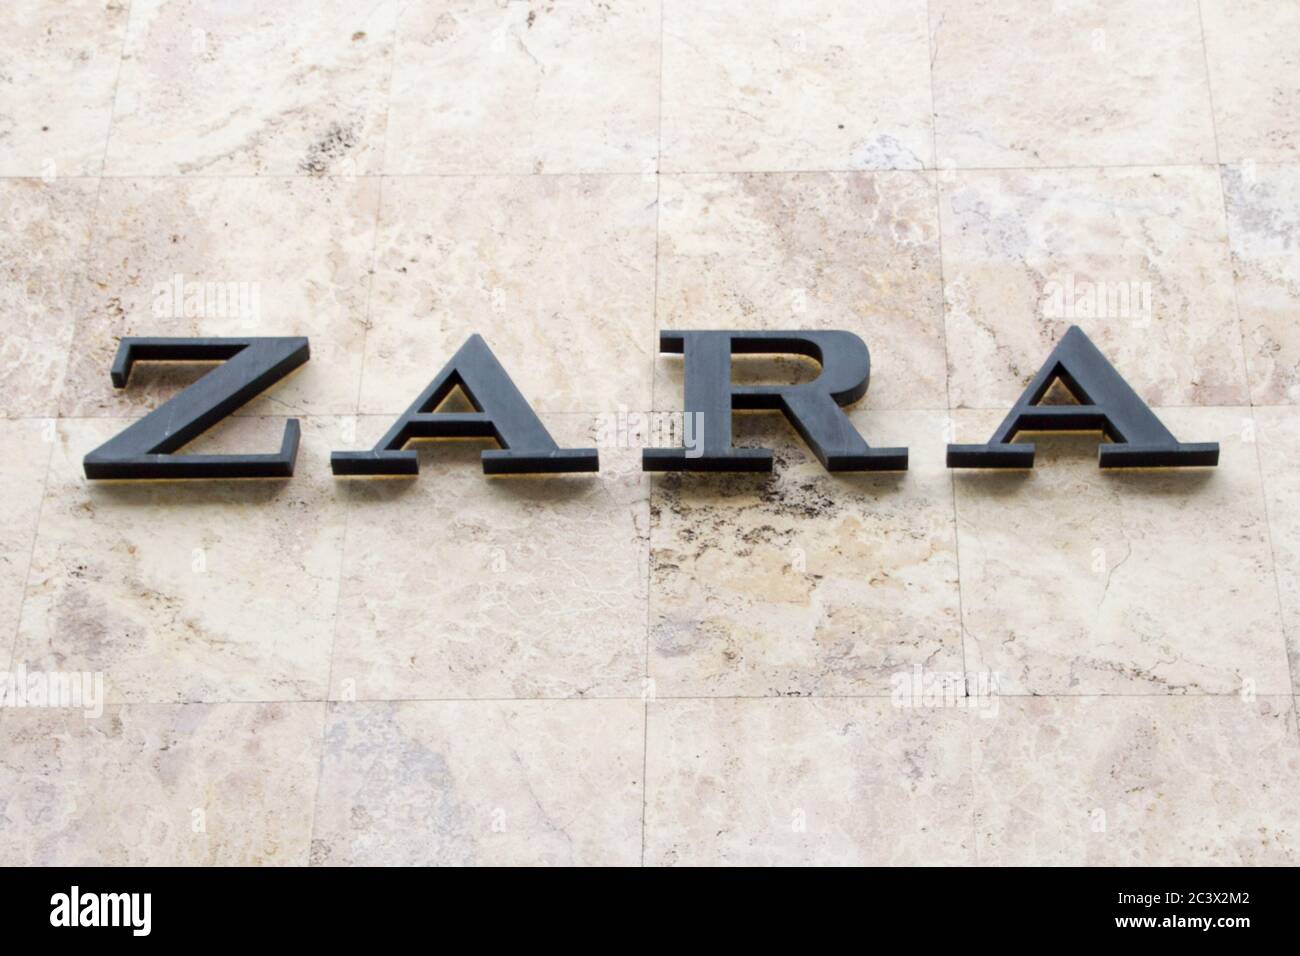 ZARA logo for Spanish clothing stores. Zara is the main fashion clothing  brand for children and adults of the Spanish company Inditex, which also  owns Stock Photo - Alamy